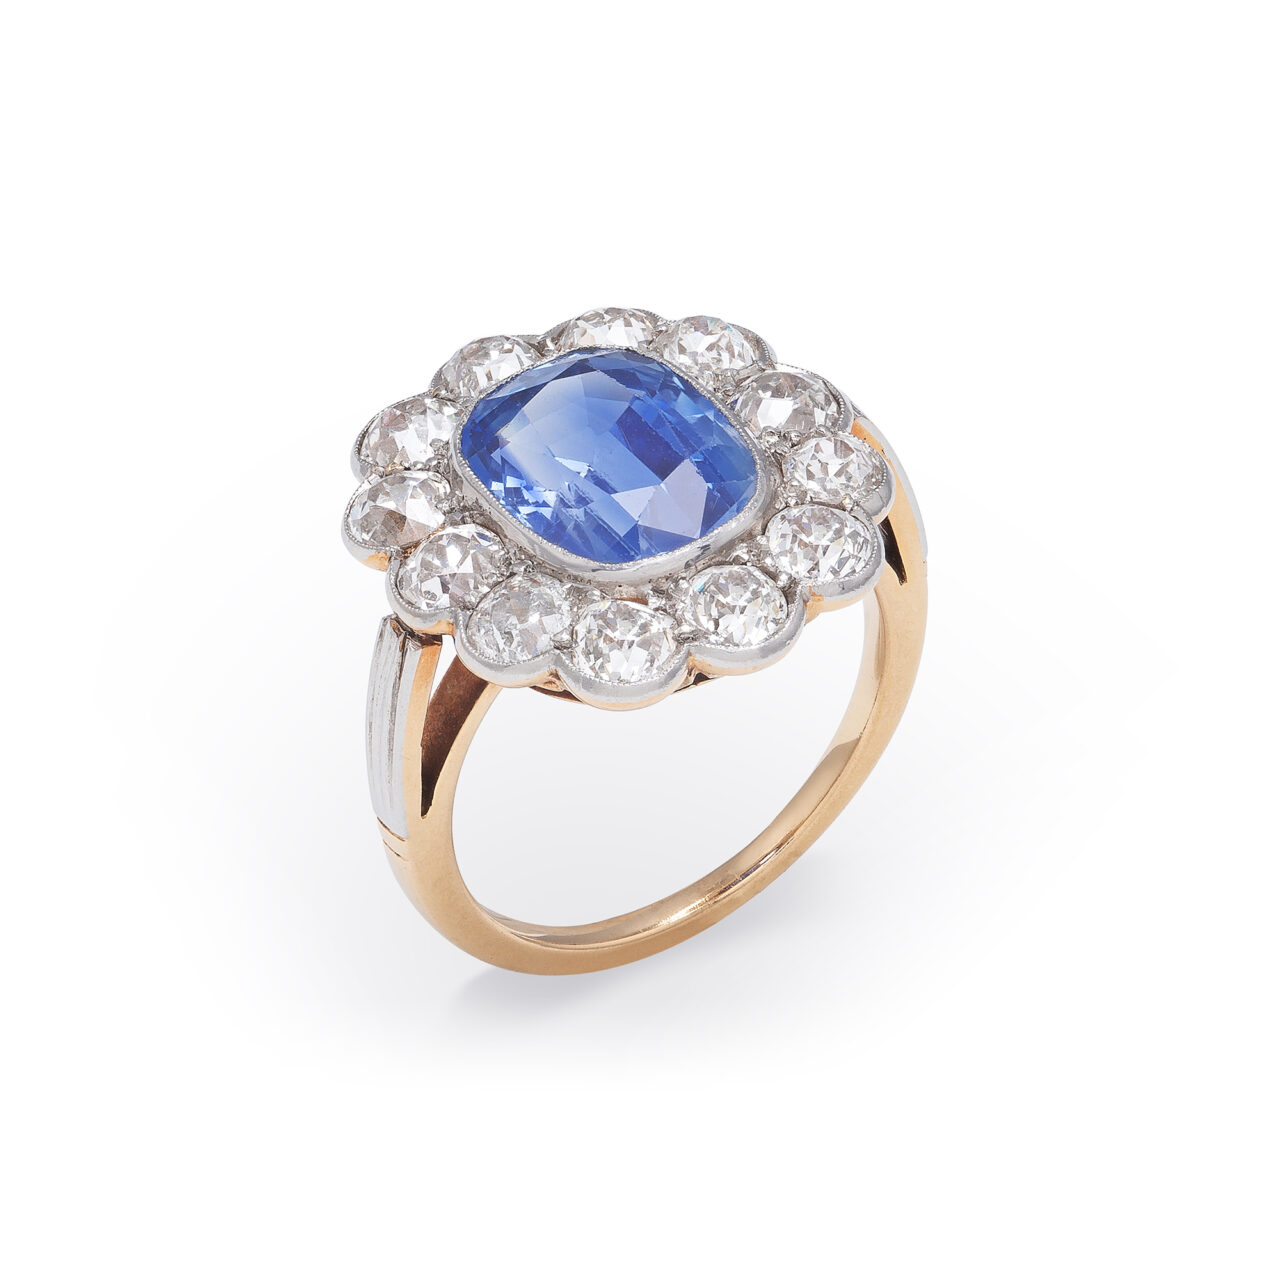 Yellow and White Gold Ring With Kashmir sapphire and diamonds